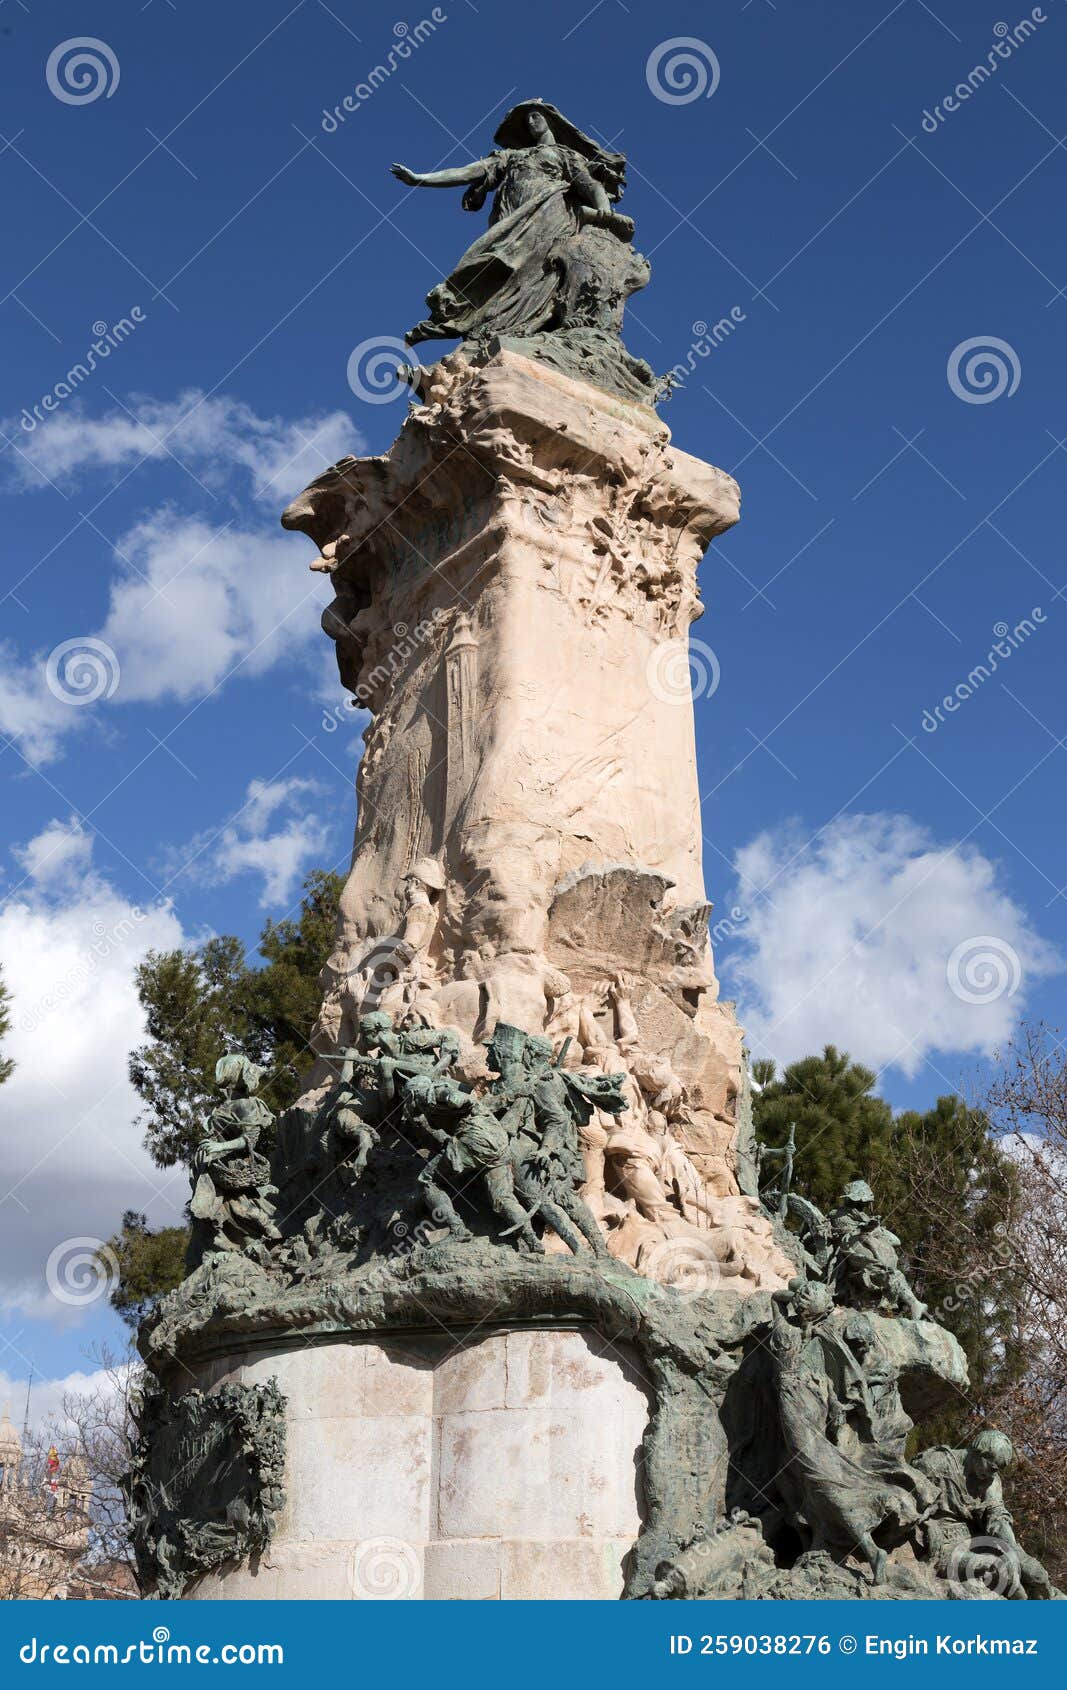 monument to the sieges of zaragoza by agustin querol, zaragoza, spain